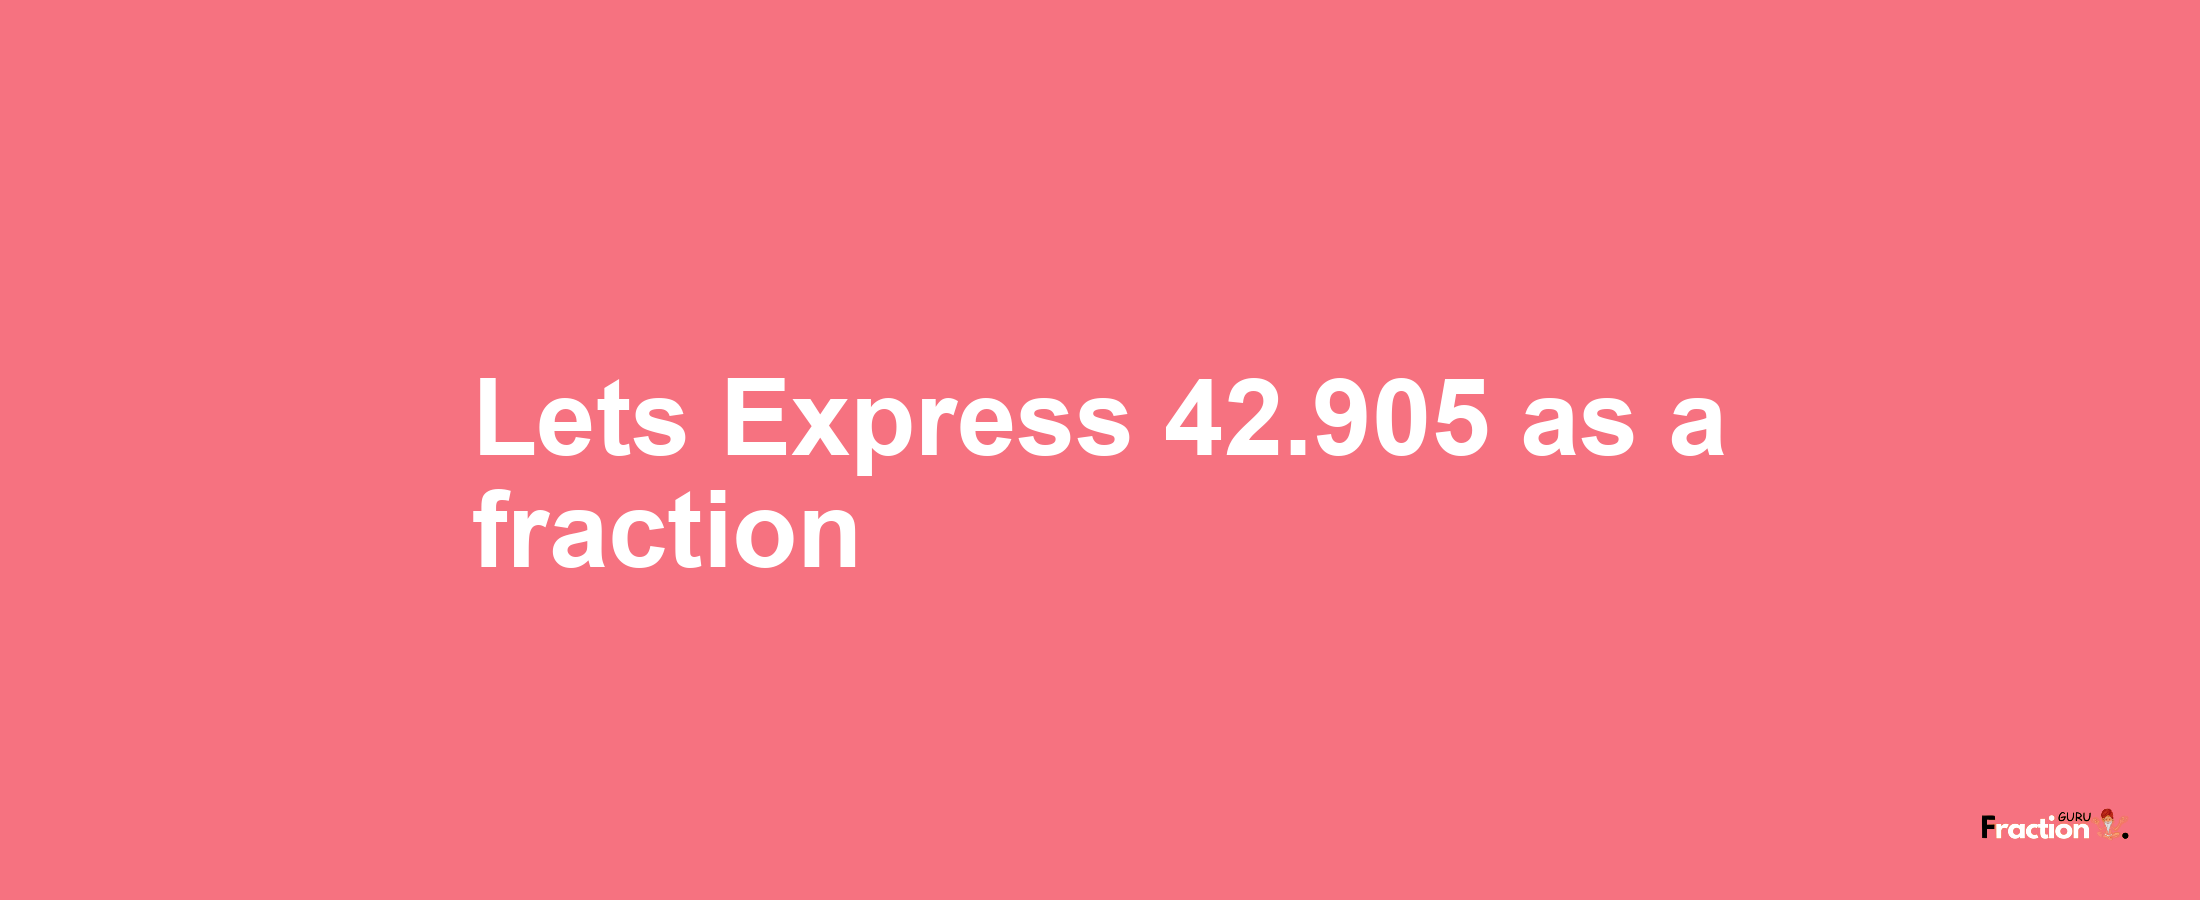 Lets Express 42.905 as afraction